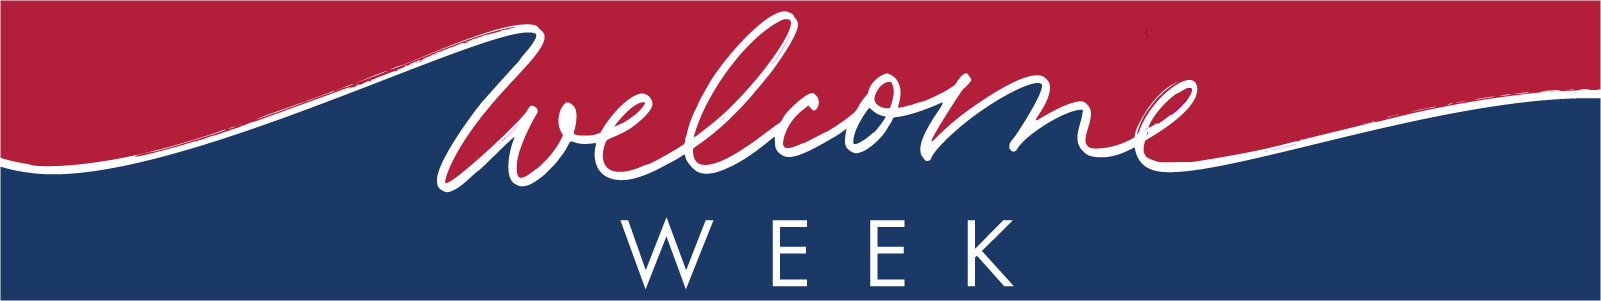 A banner image with a cursive text design reads Welcome WEEK inside a rectangular shape divided into top and bottom sections, in which the top is red and the bottom is blue.